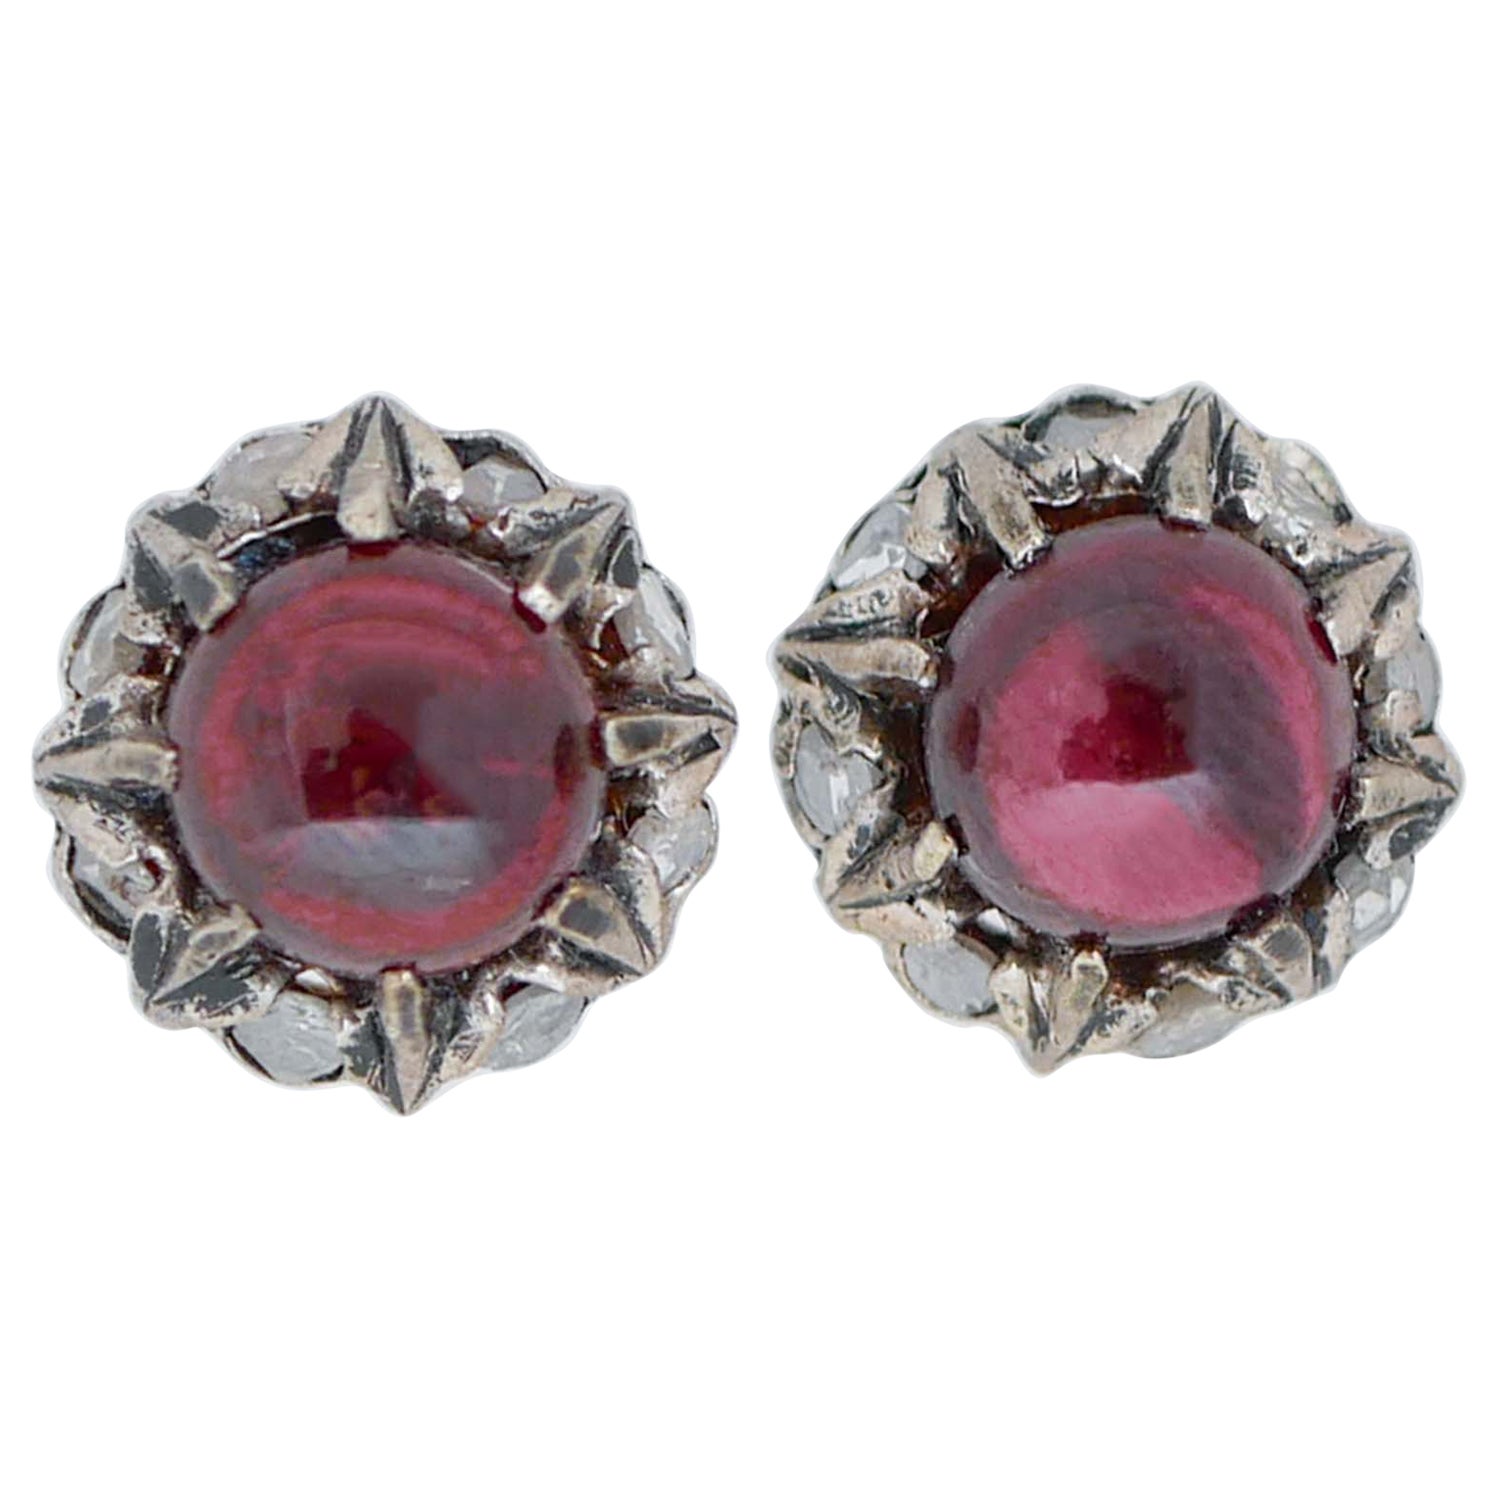 Diamonds, Garnets, Rose Gold and Silver Stud Earrings